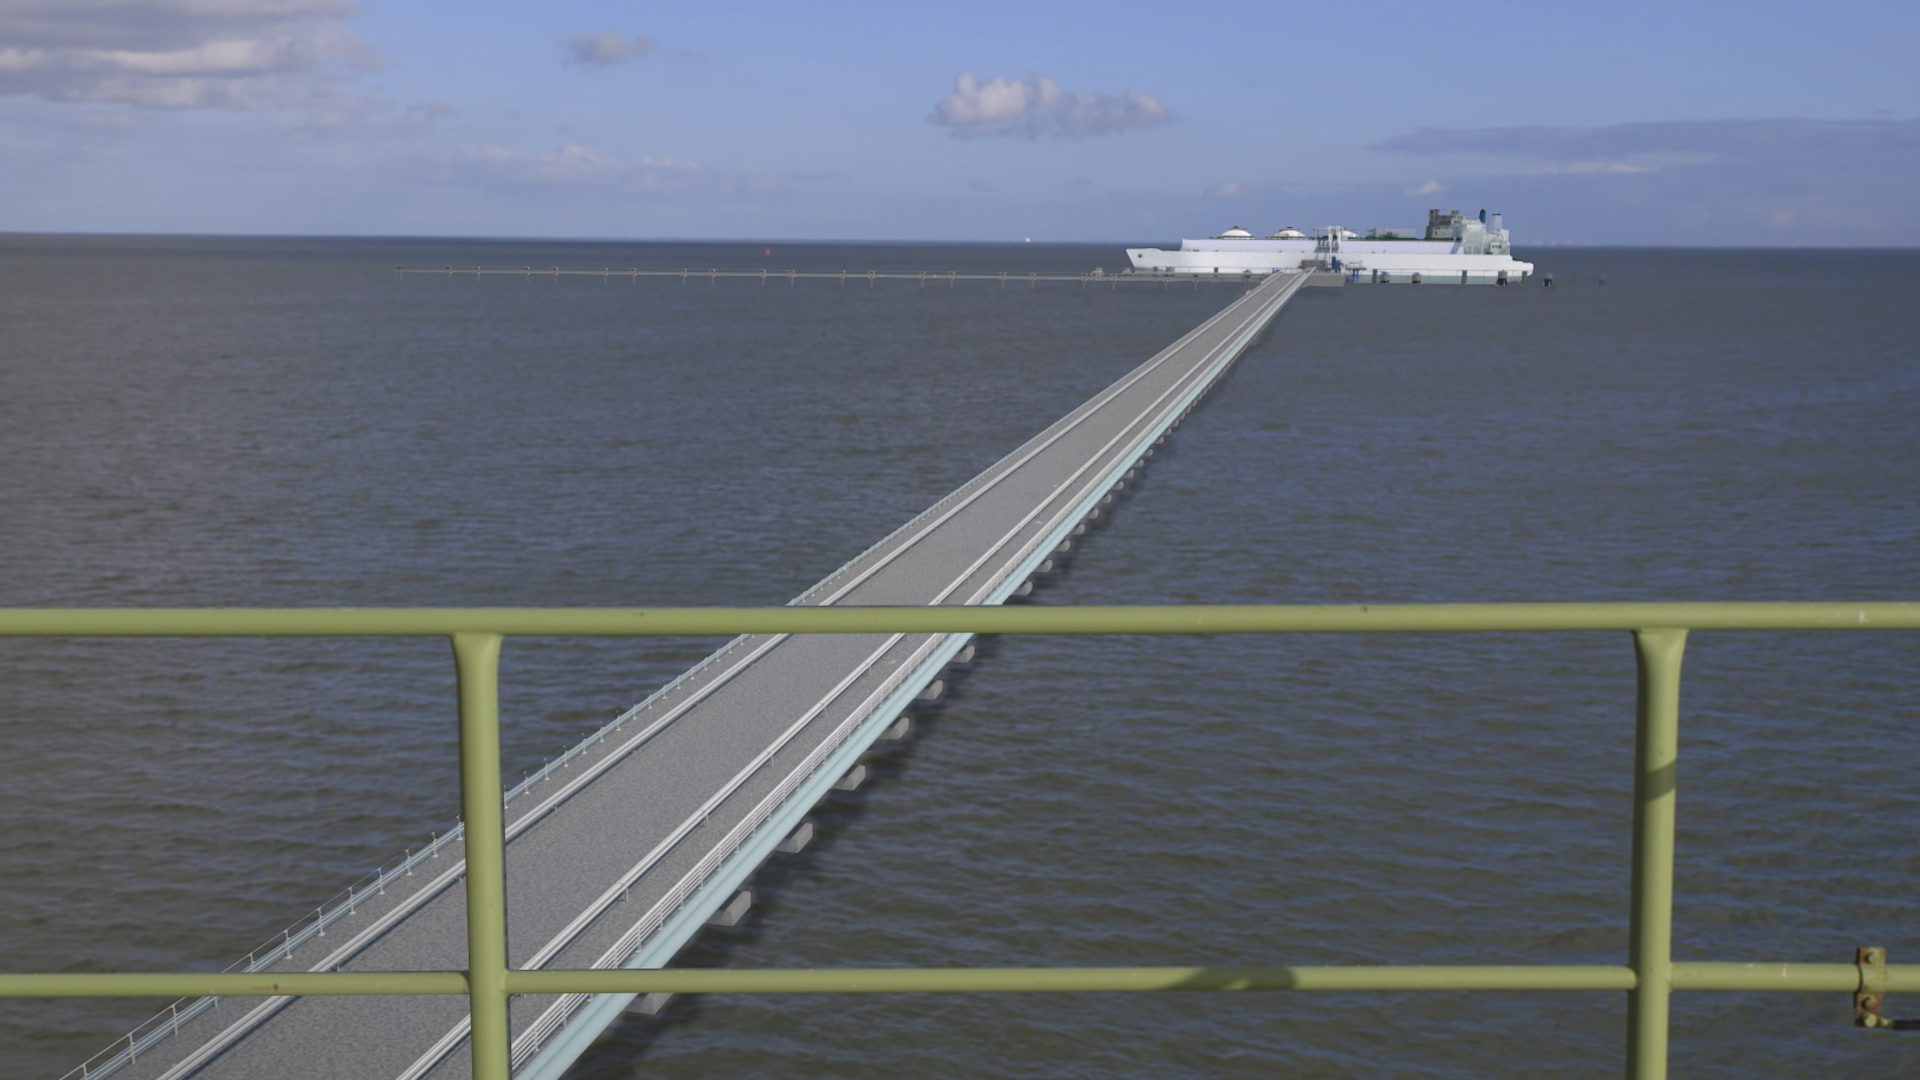 #D Rendering of the Wilhelmshaven FSRU and the connecting line.